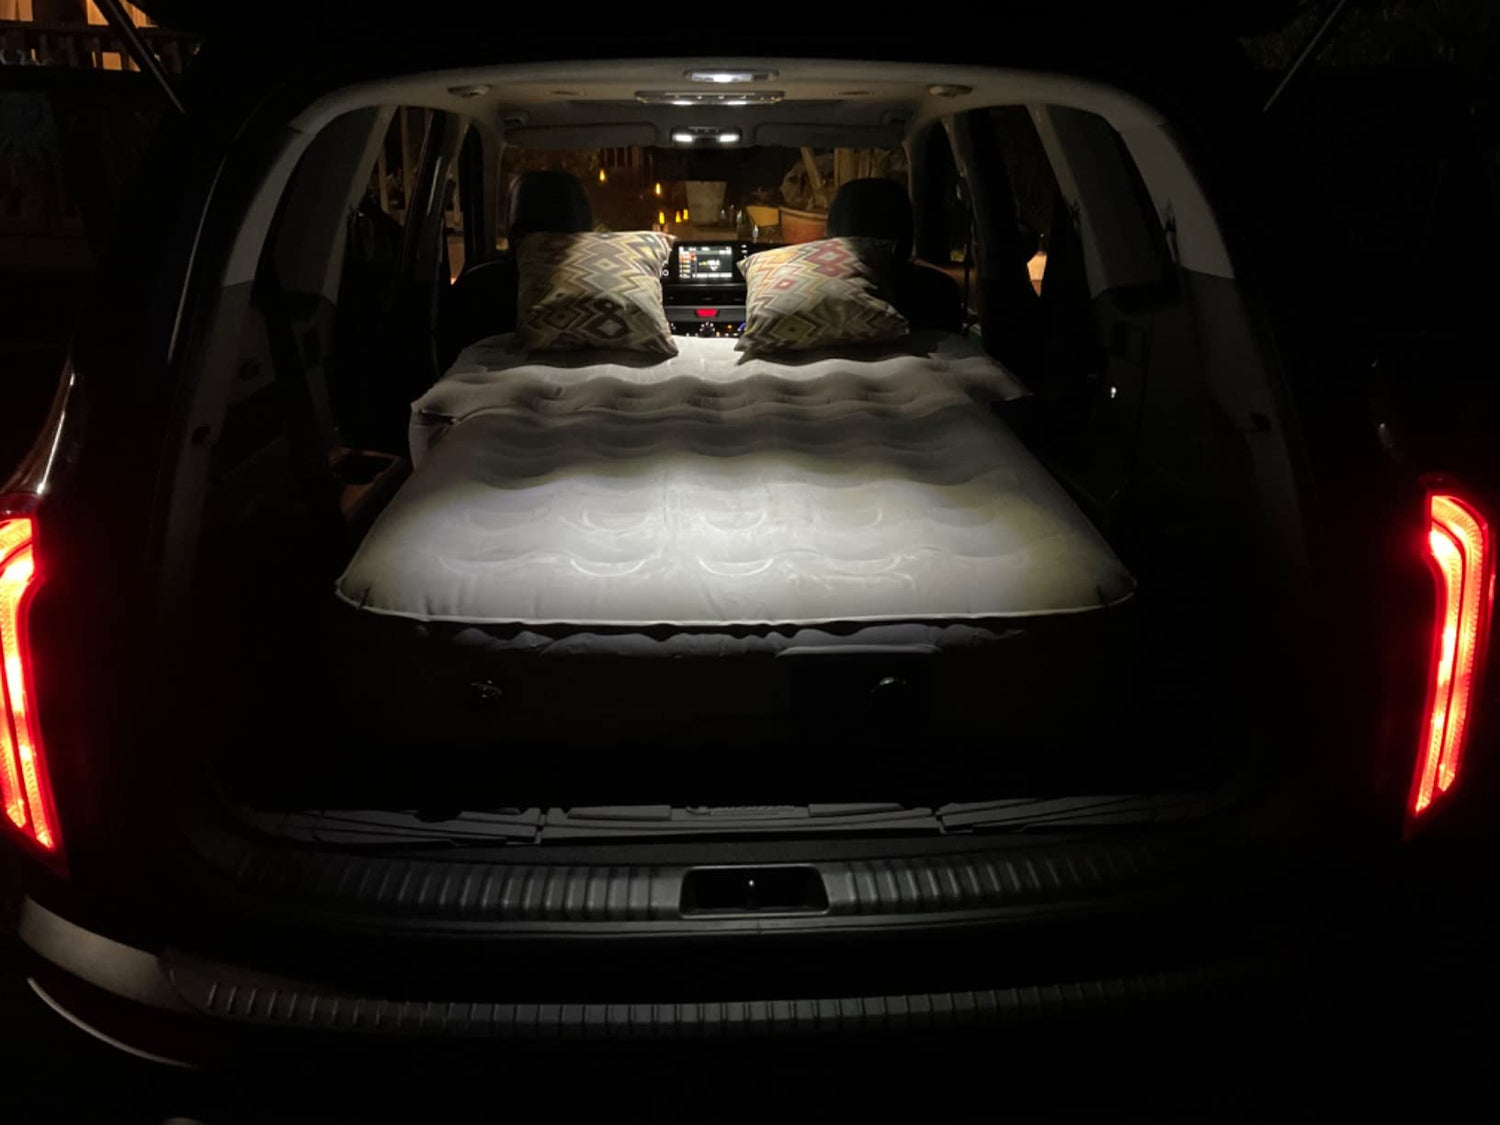 Jeep Wrangler Air Mattress-The Ultimate Off-Road Experience with Air Cushion Technology SUPAREE